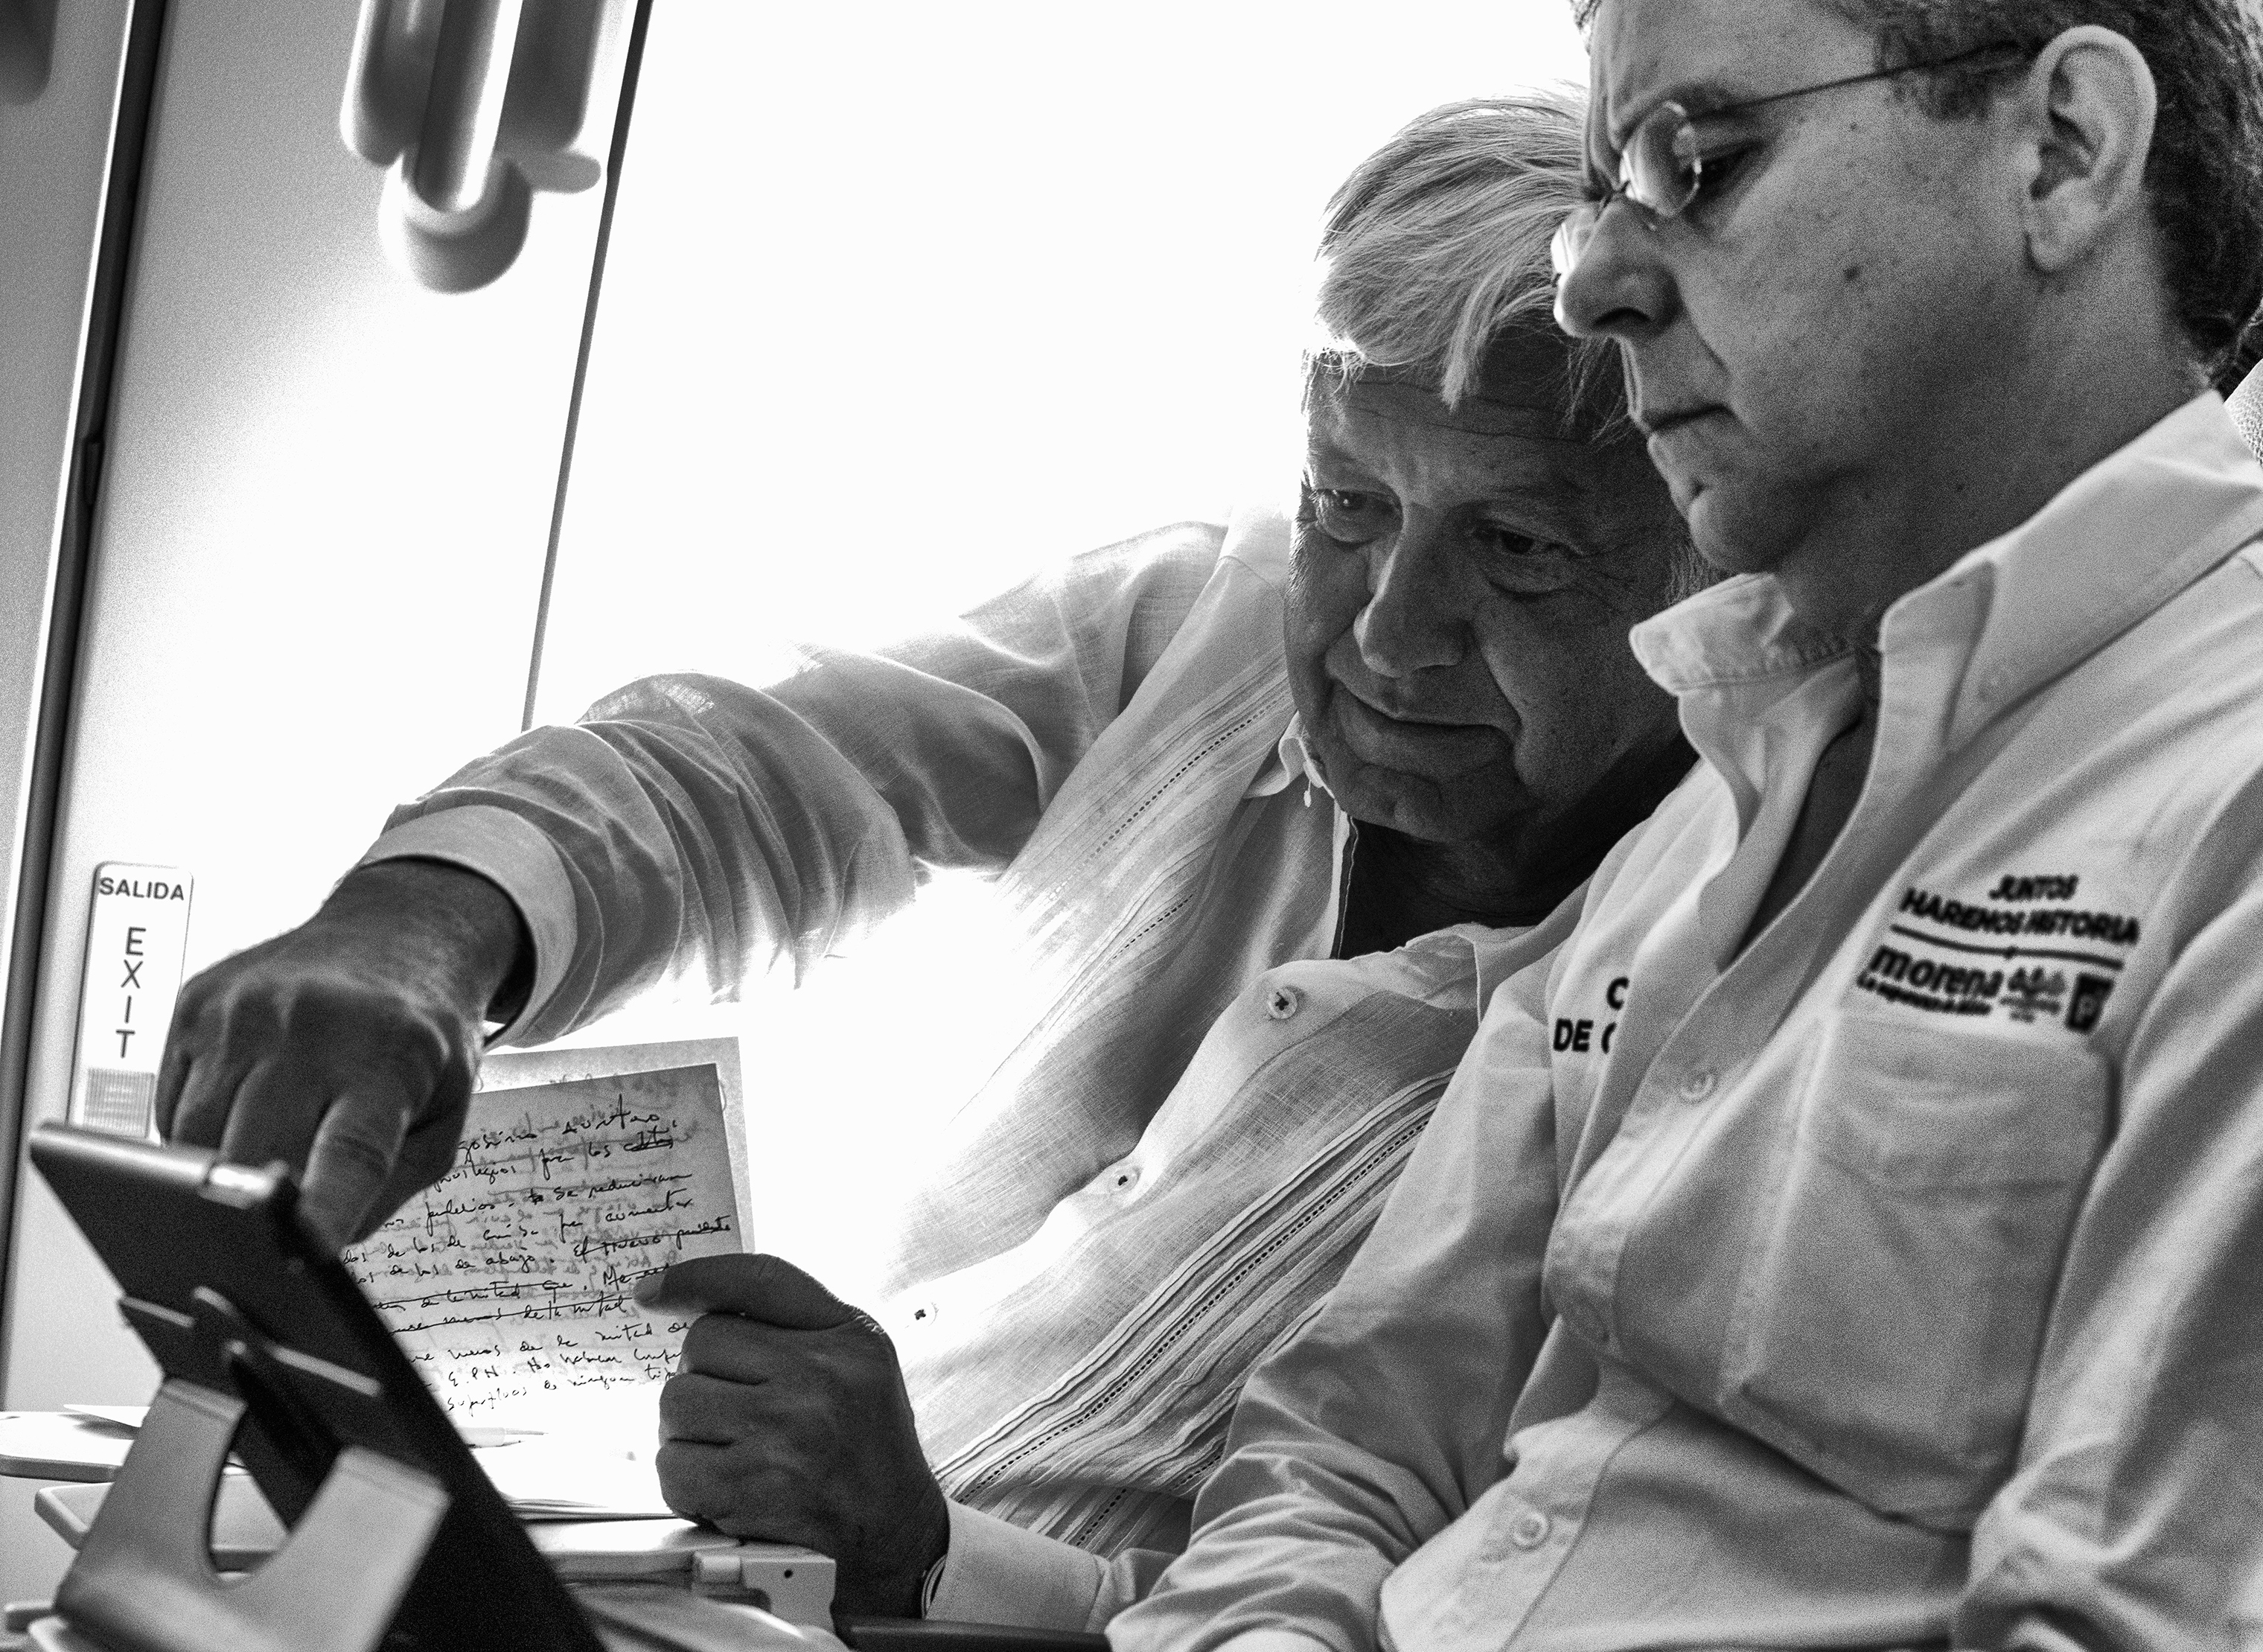 López Obrador works on a final campaign speech, alongside his Press Secretary César Yáñez, on a commercial flight to Cancún ahead of the July 1 elections. (Christopher Morris—VII for TIME)